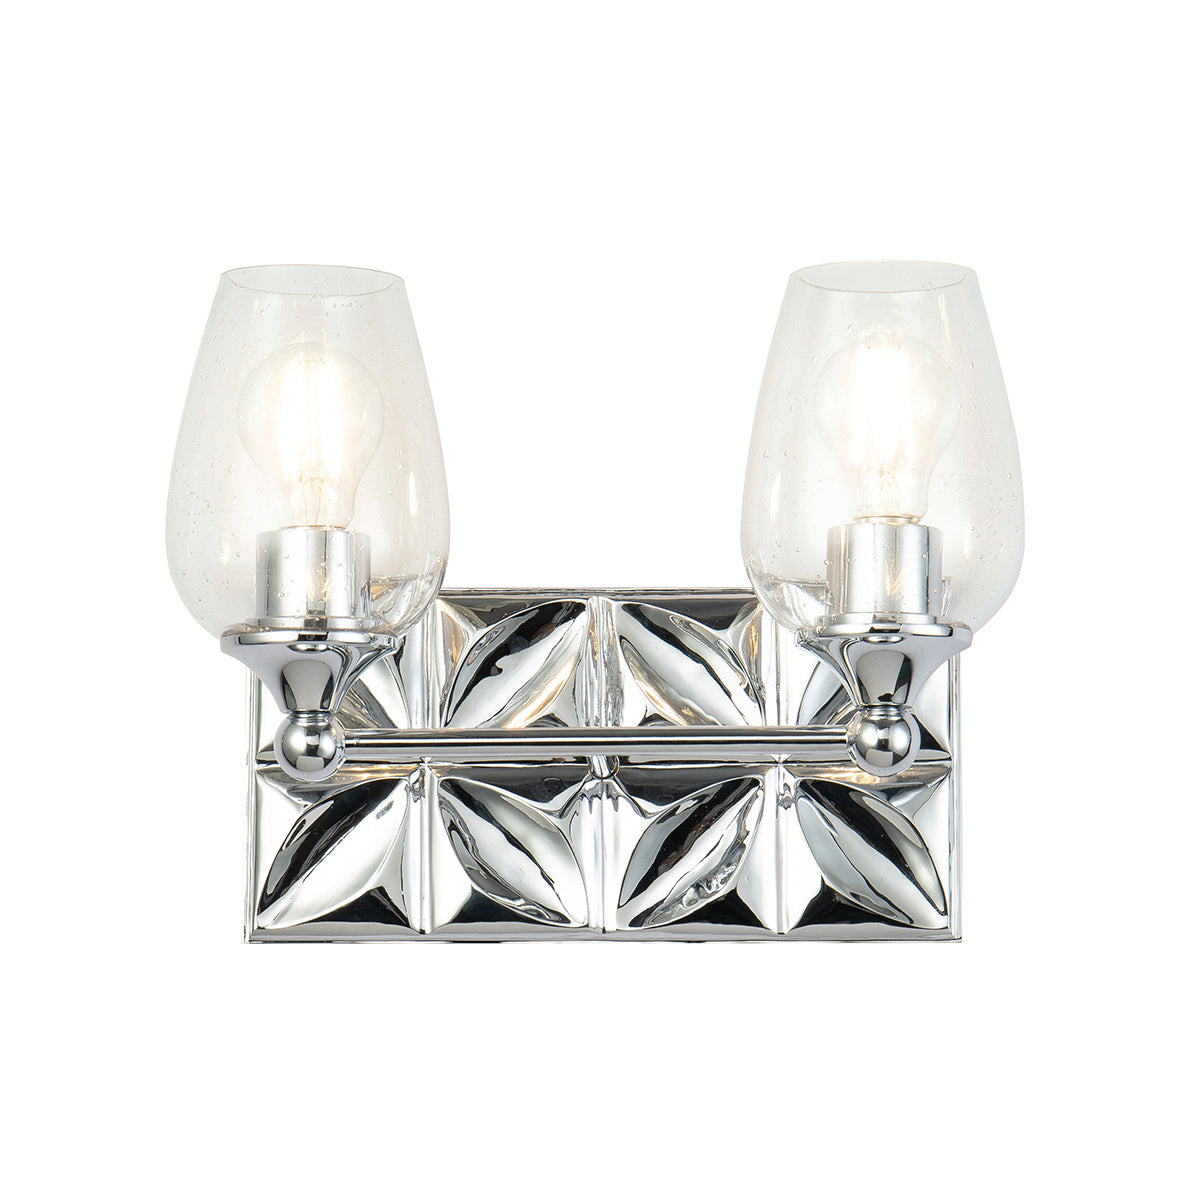 Lucas + McKearn Two Light Vanity from the Epsilon collection in Polished Chrome finish